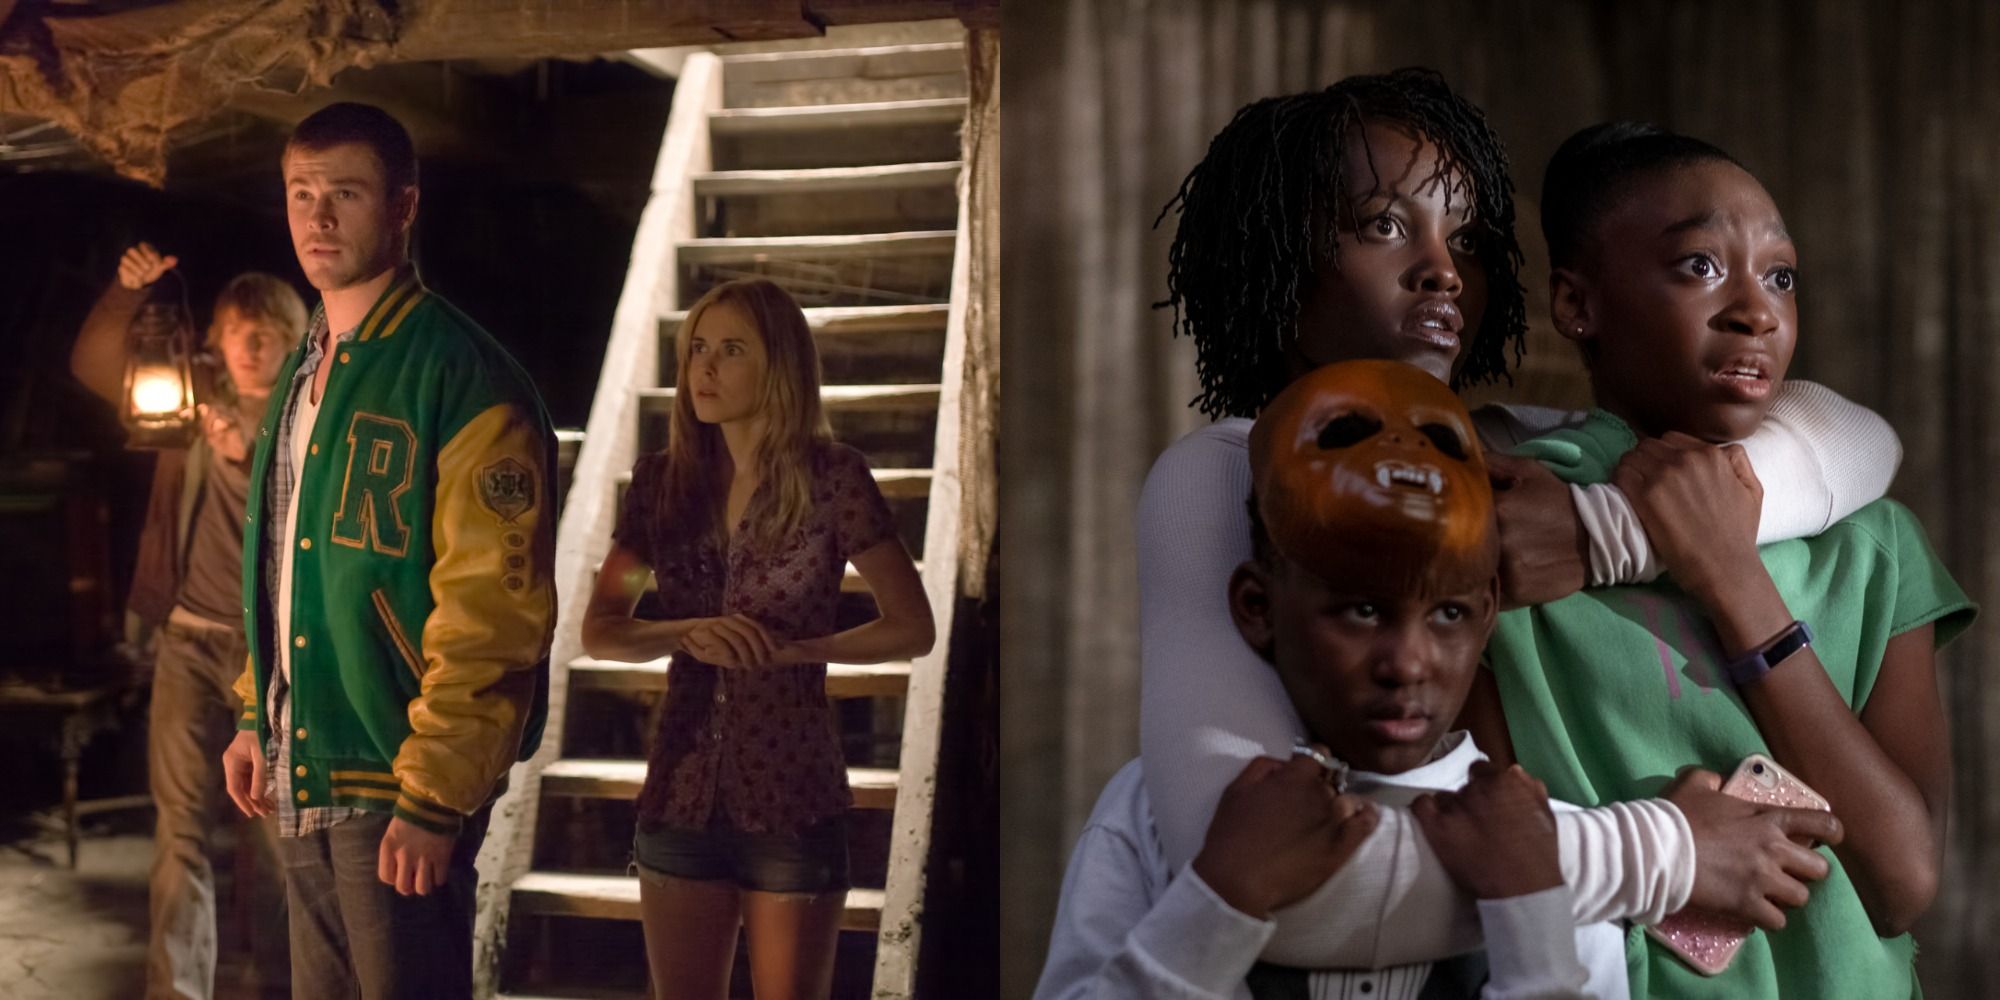 Split image showing characters from The Cabin in the Woods and Us.